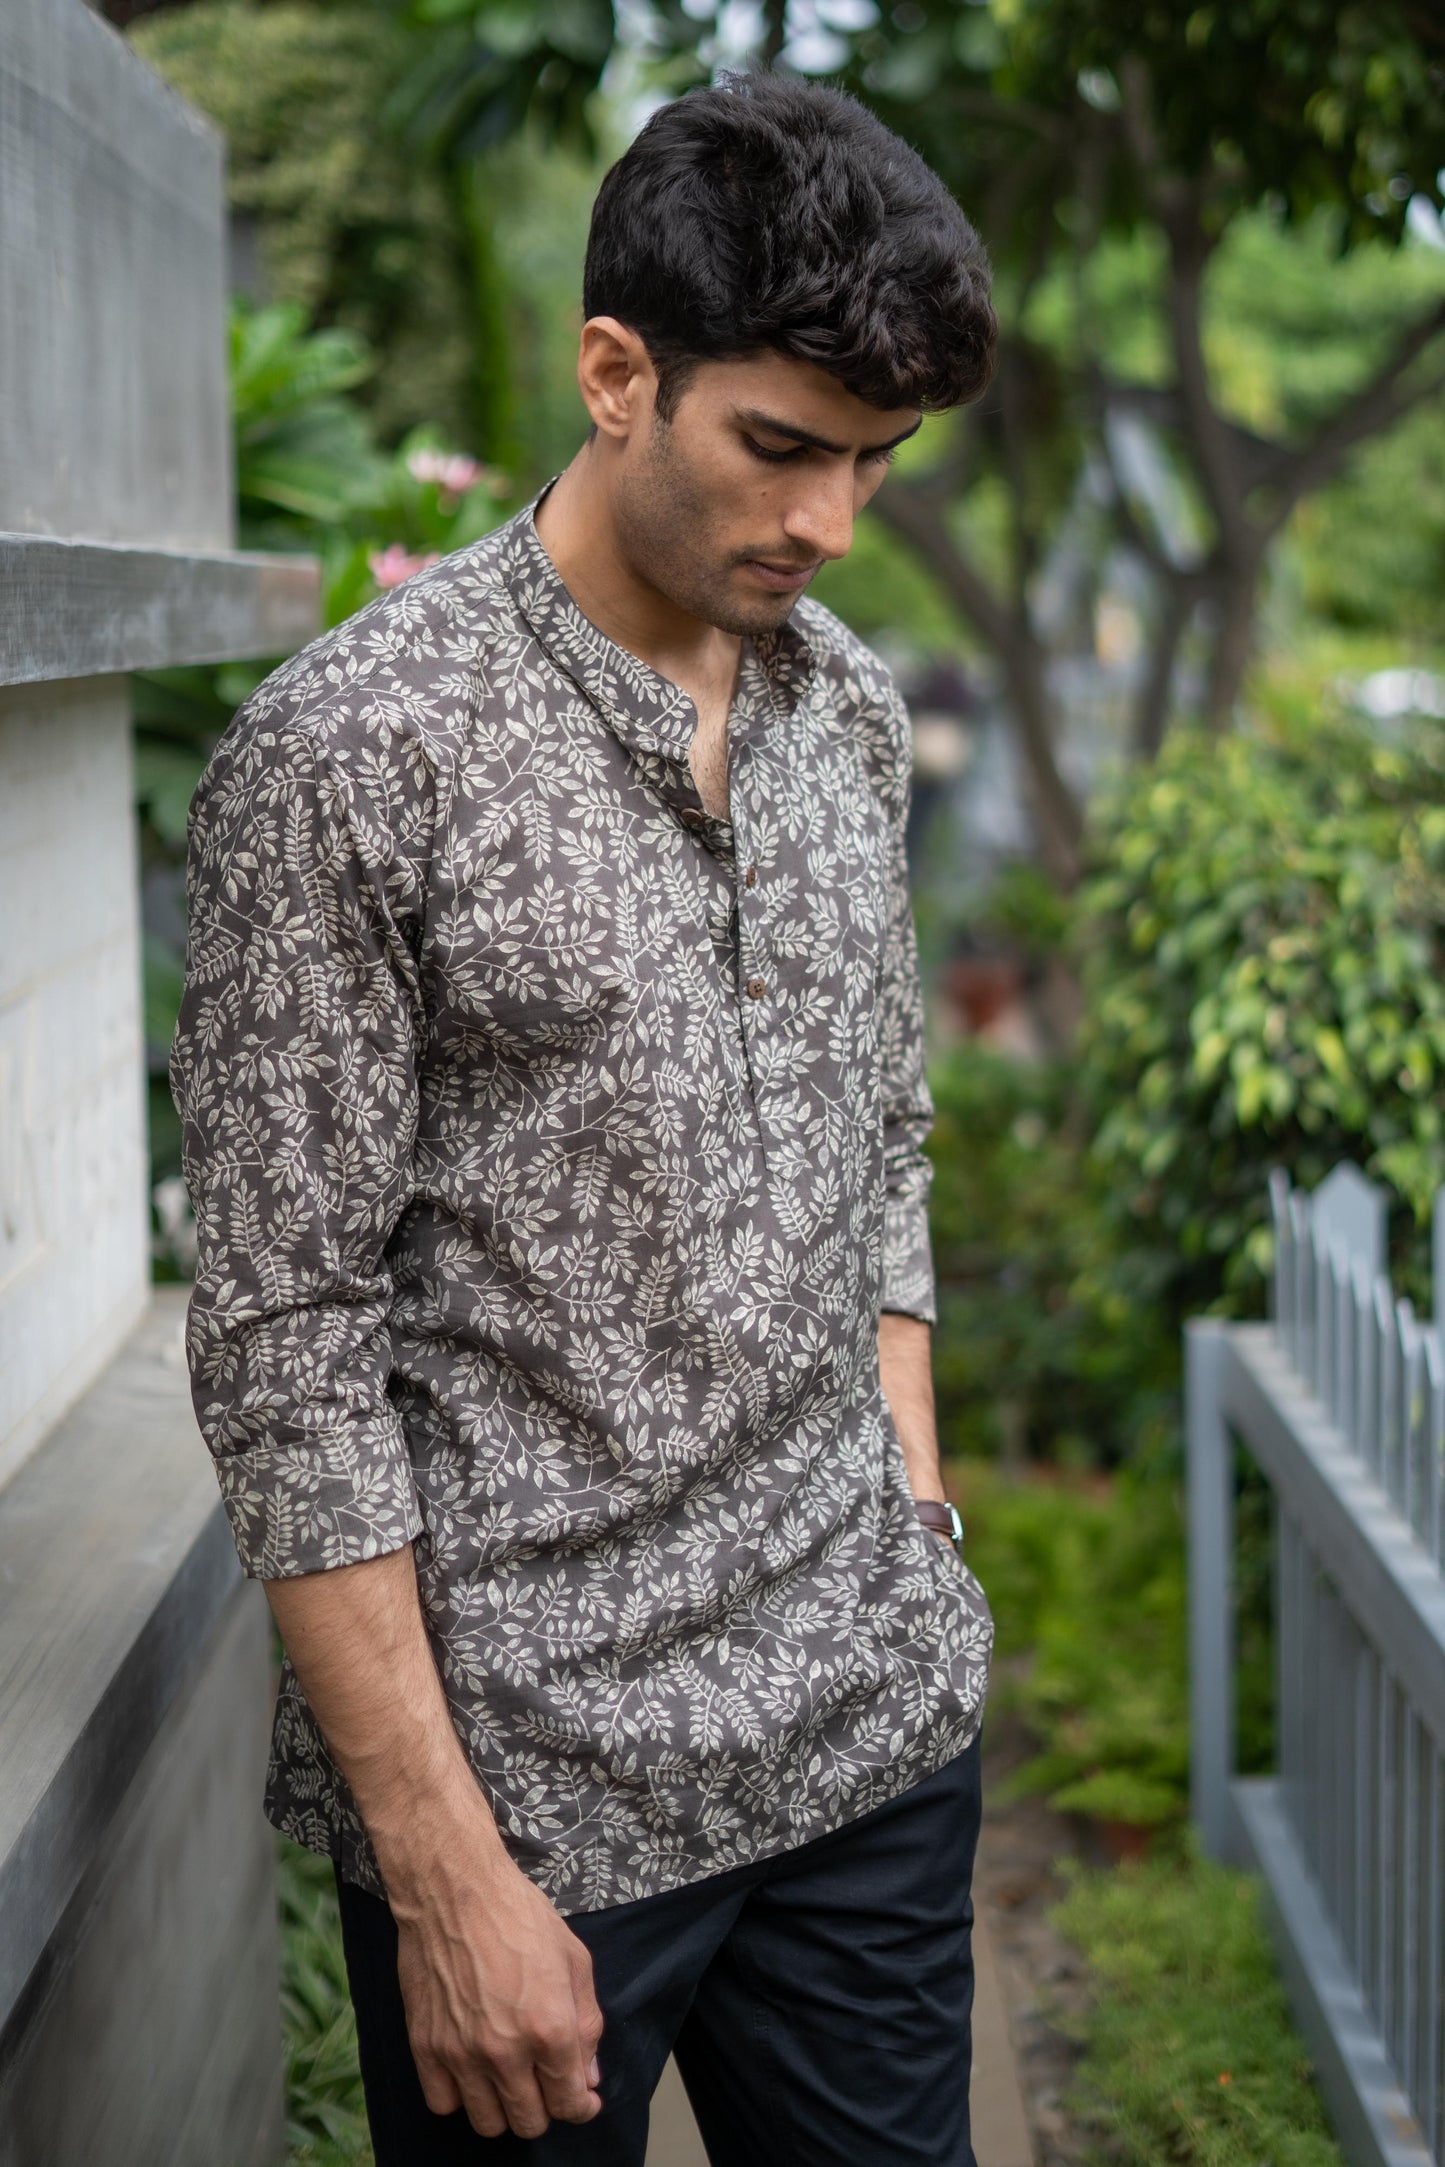 The Dark Grey Short Kurta With All-Over Floral Print